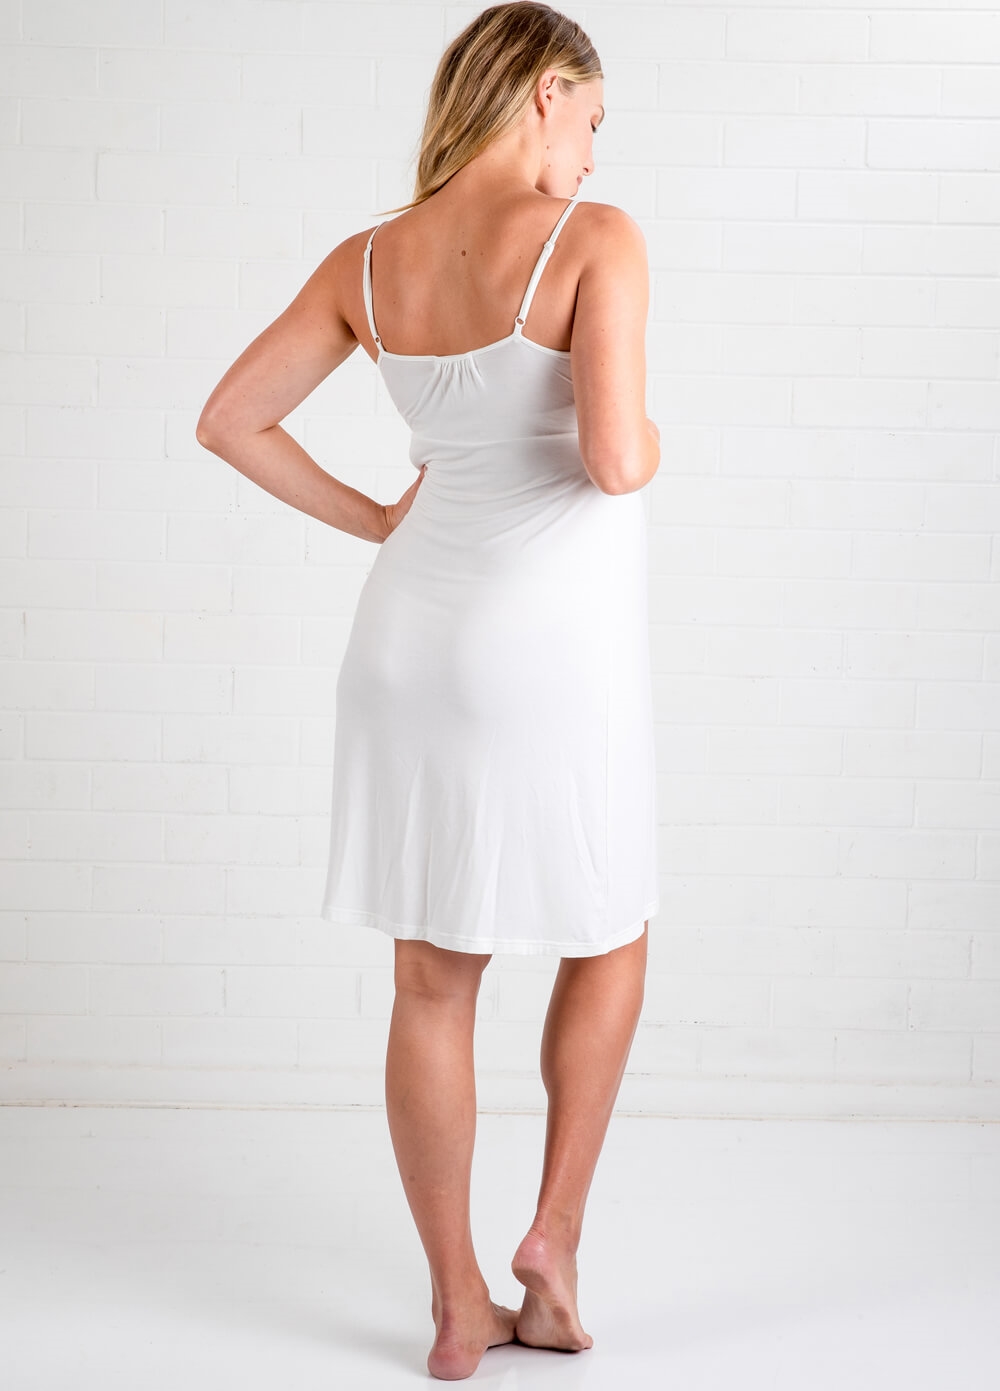 Lait & Co - Moselle Ivory Maternity Nursing Chemise | Queen Bee